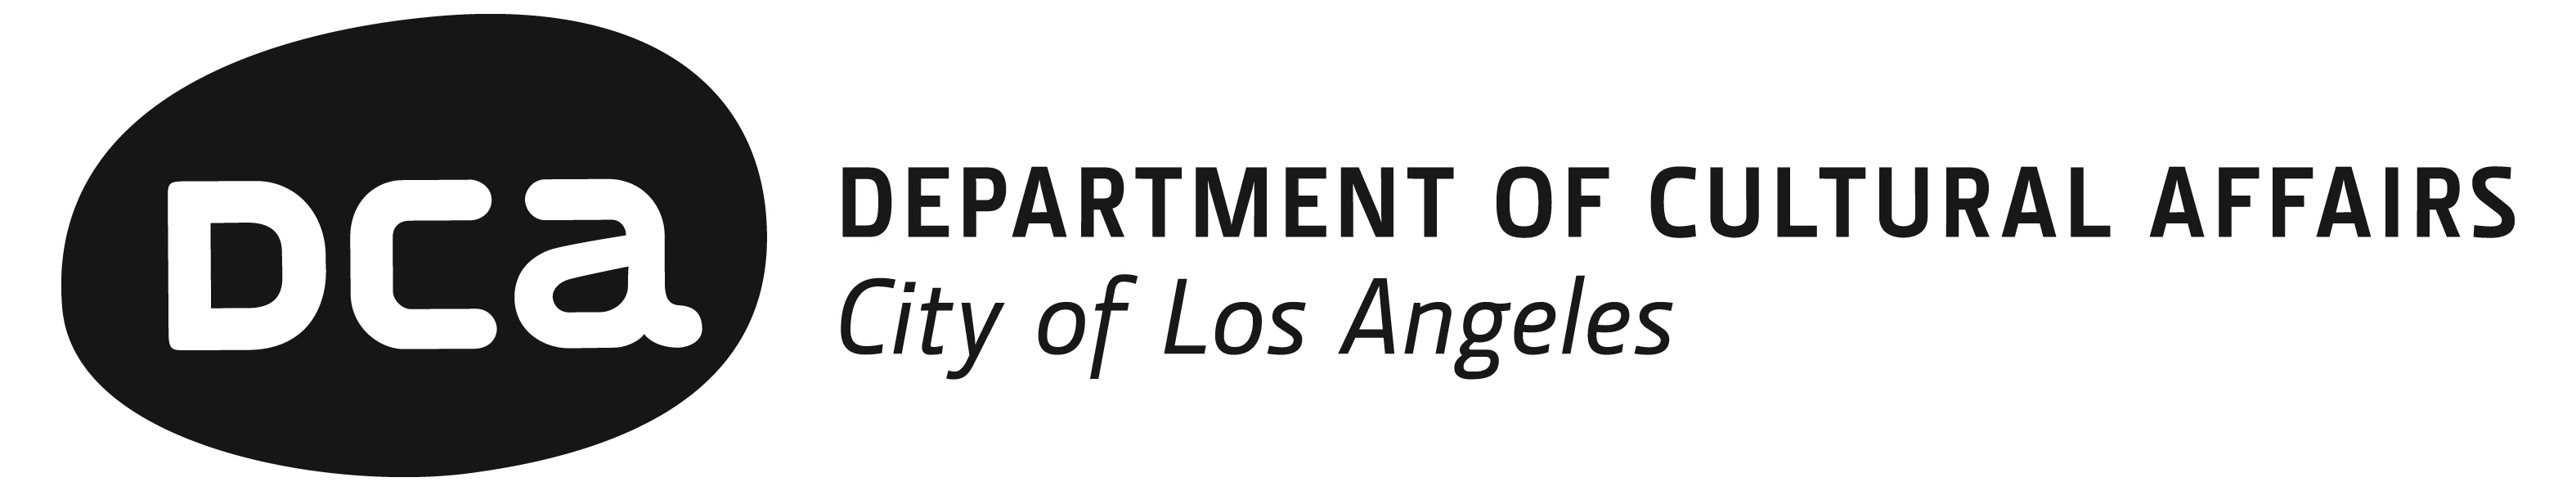 Los Angeles Department of Cultural Affairs Logo